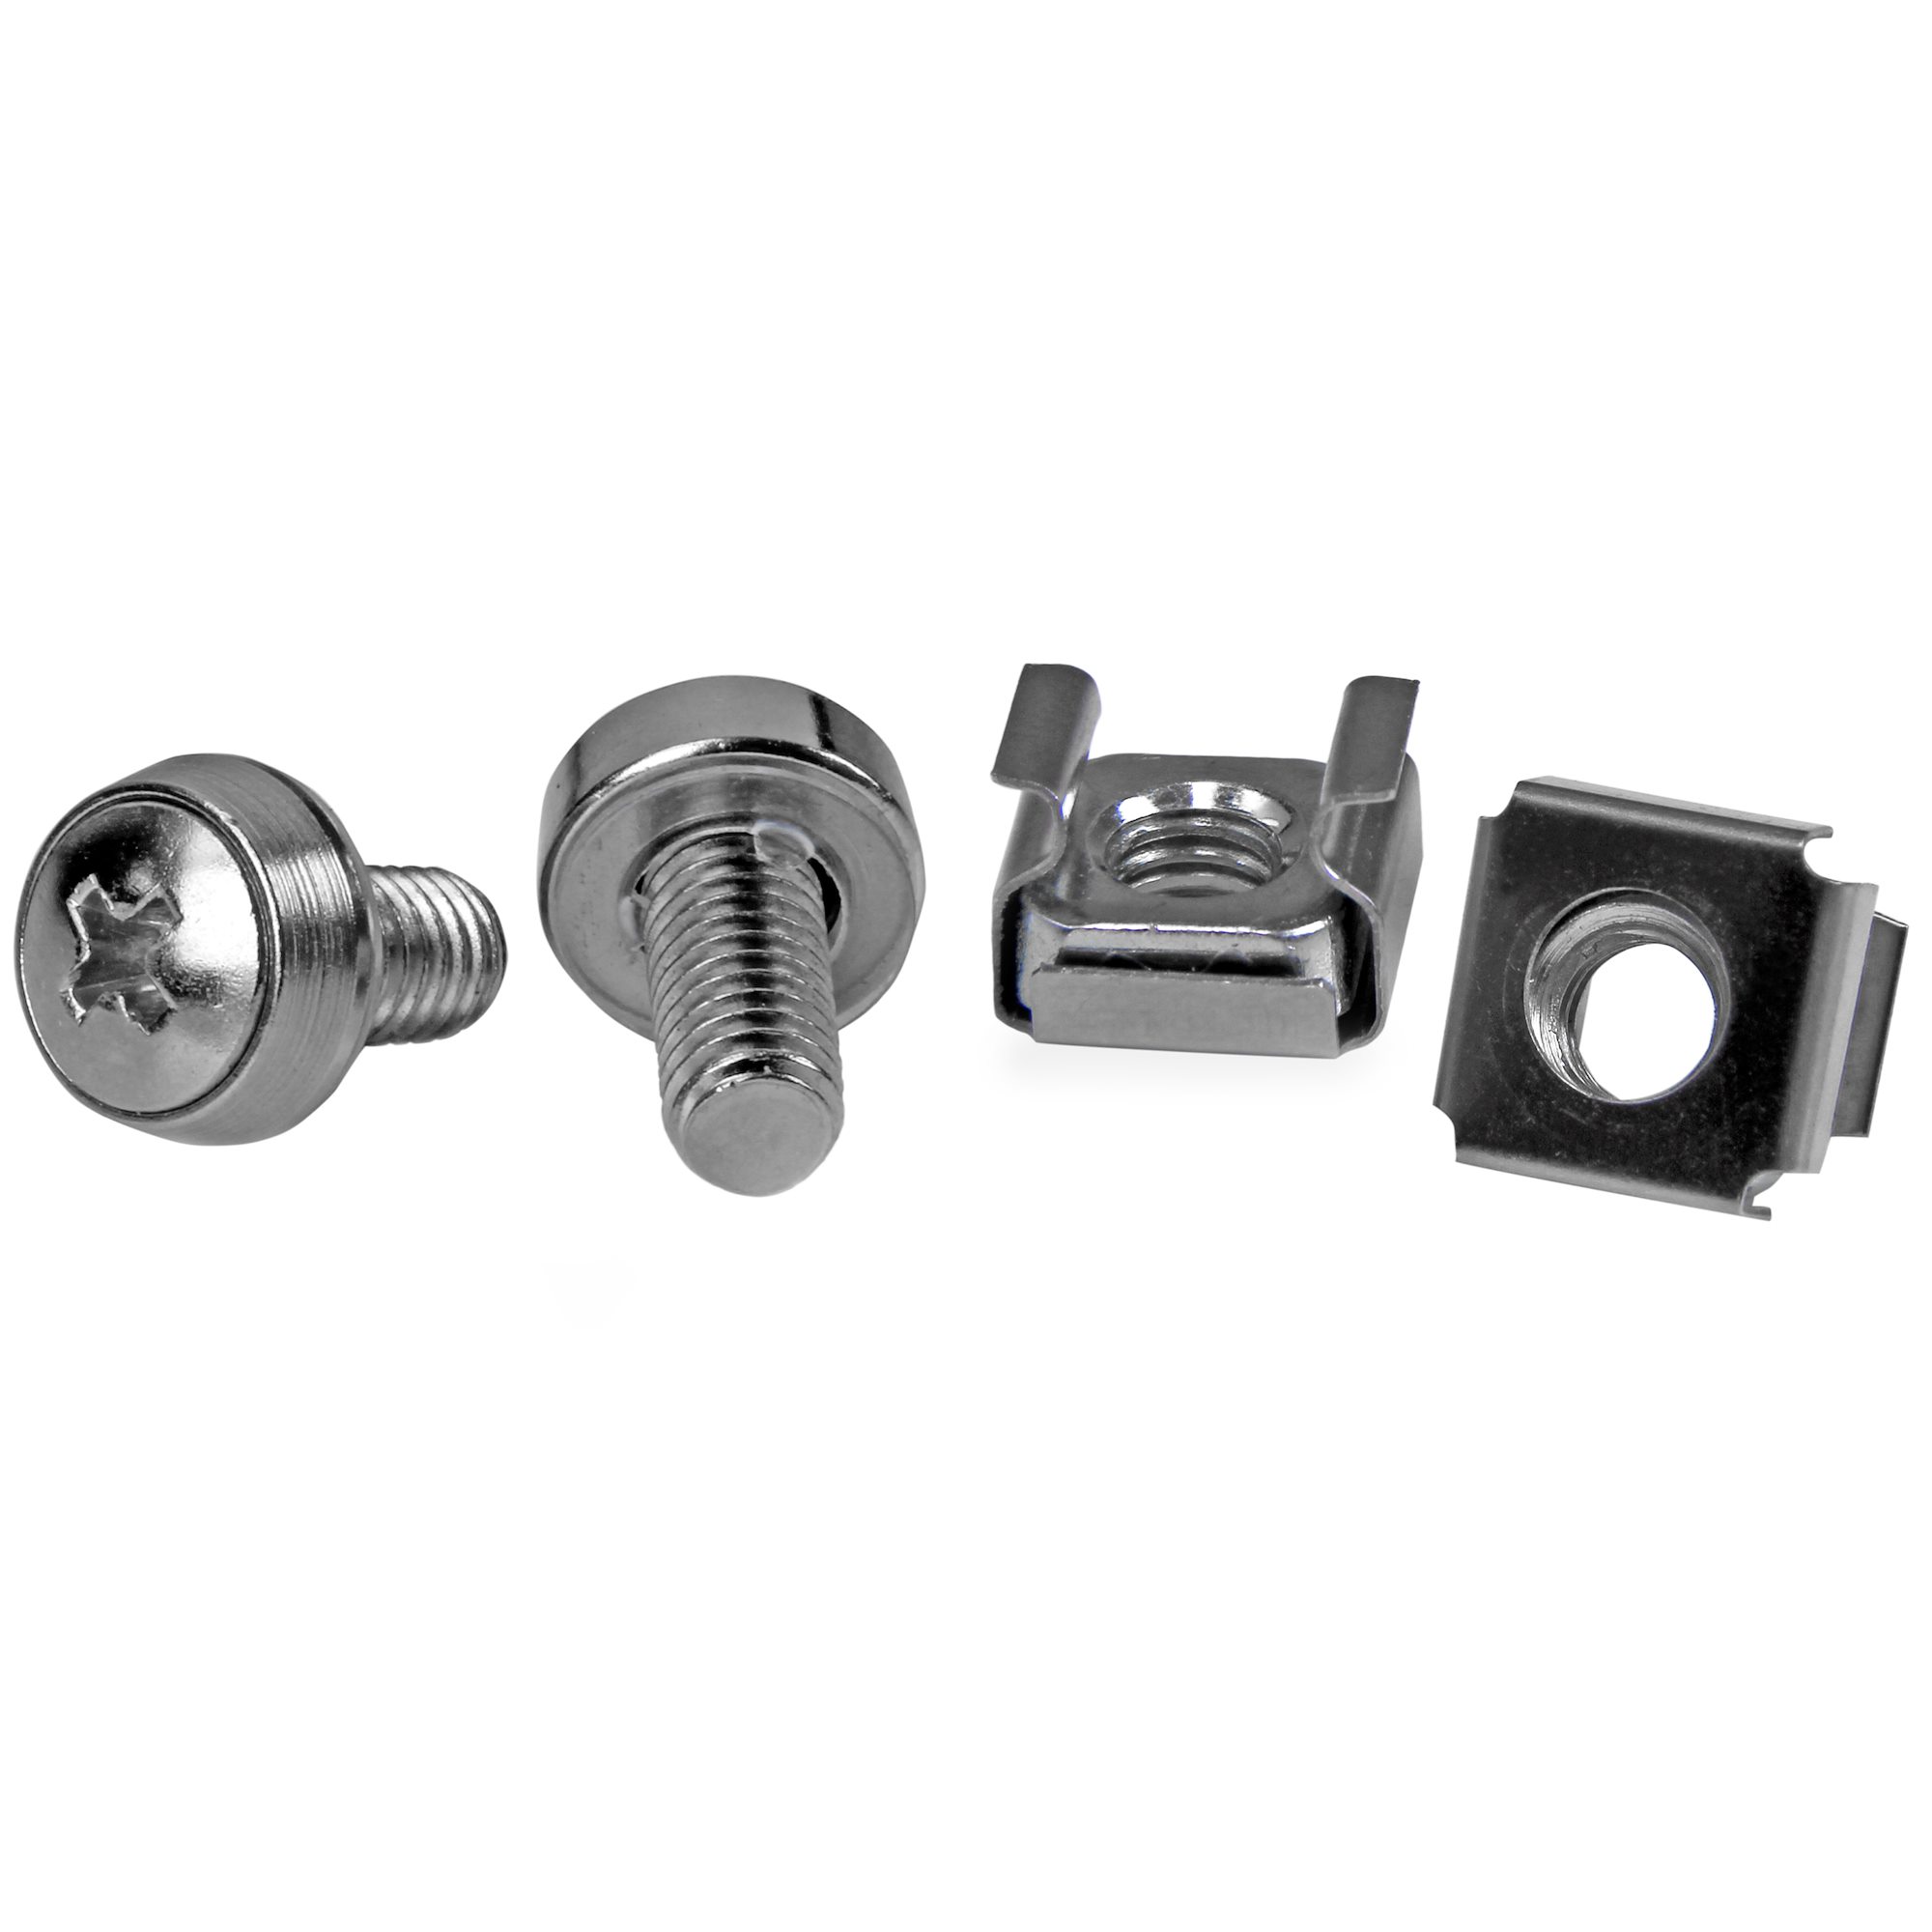 Nickel-Plated M6 Connecting Screws Complete Fitting Finish 